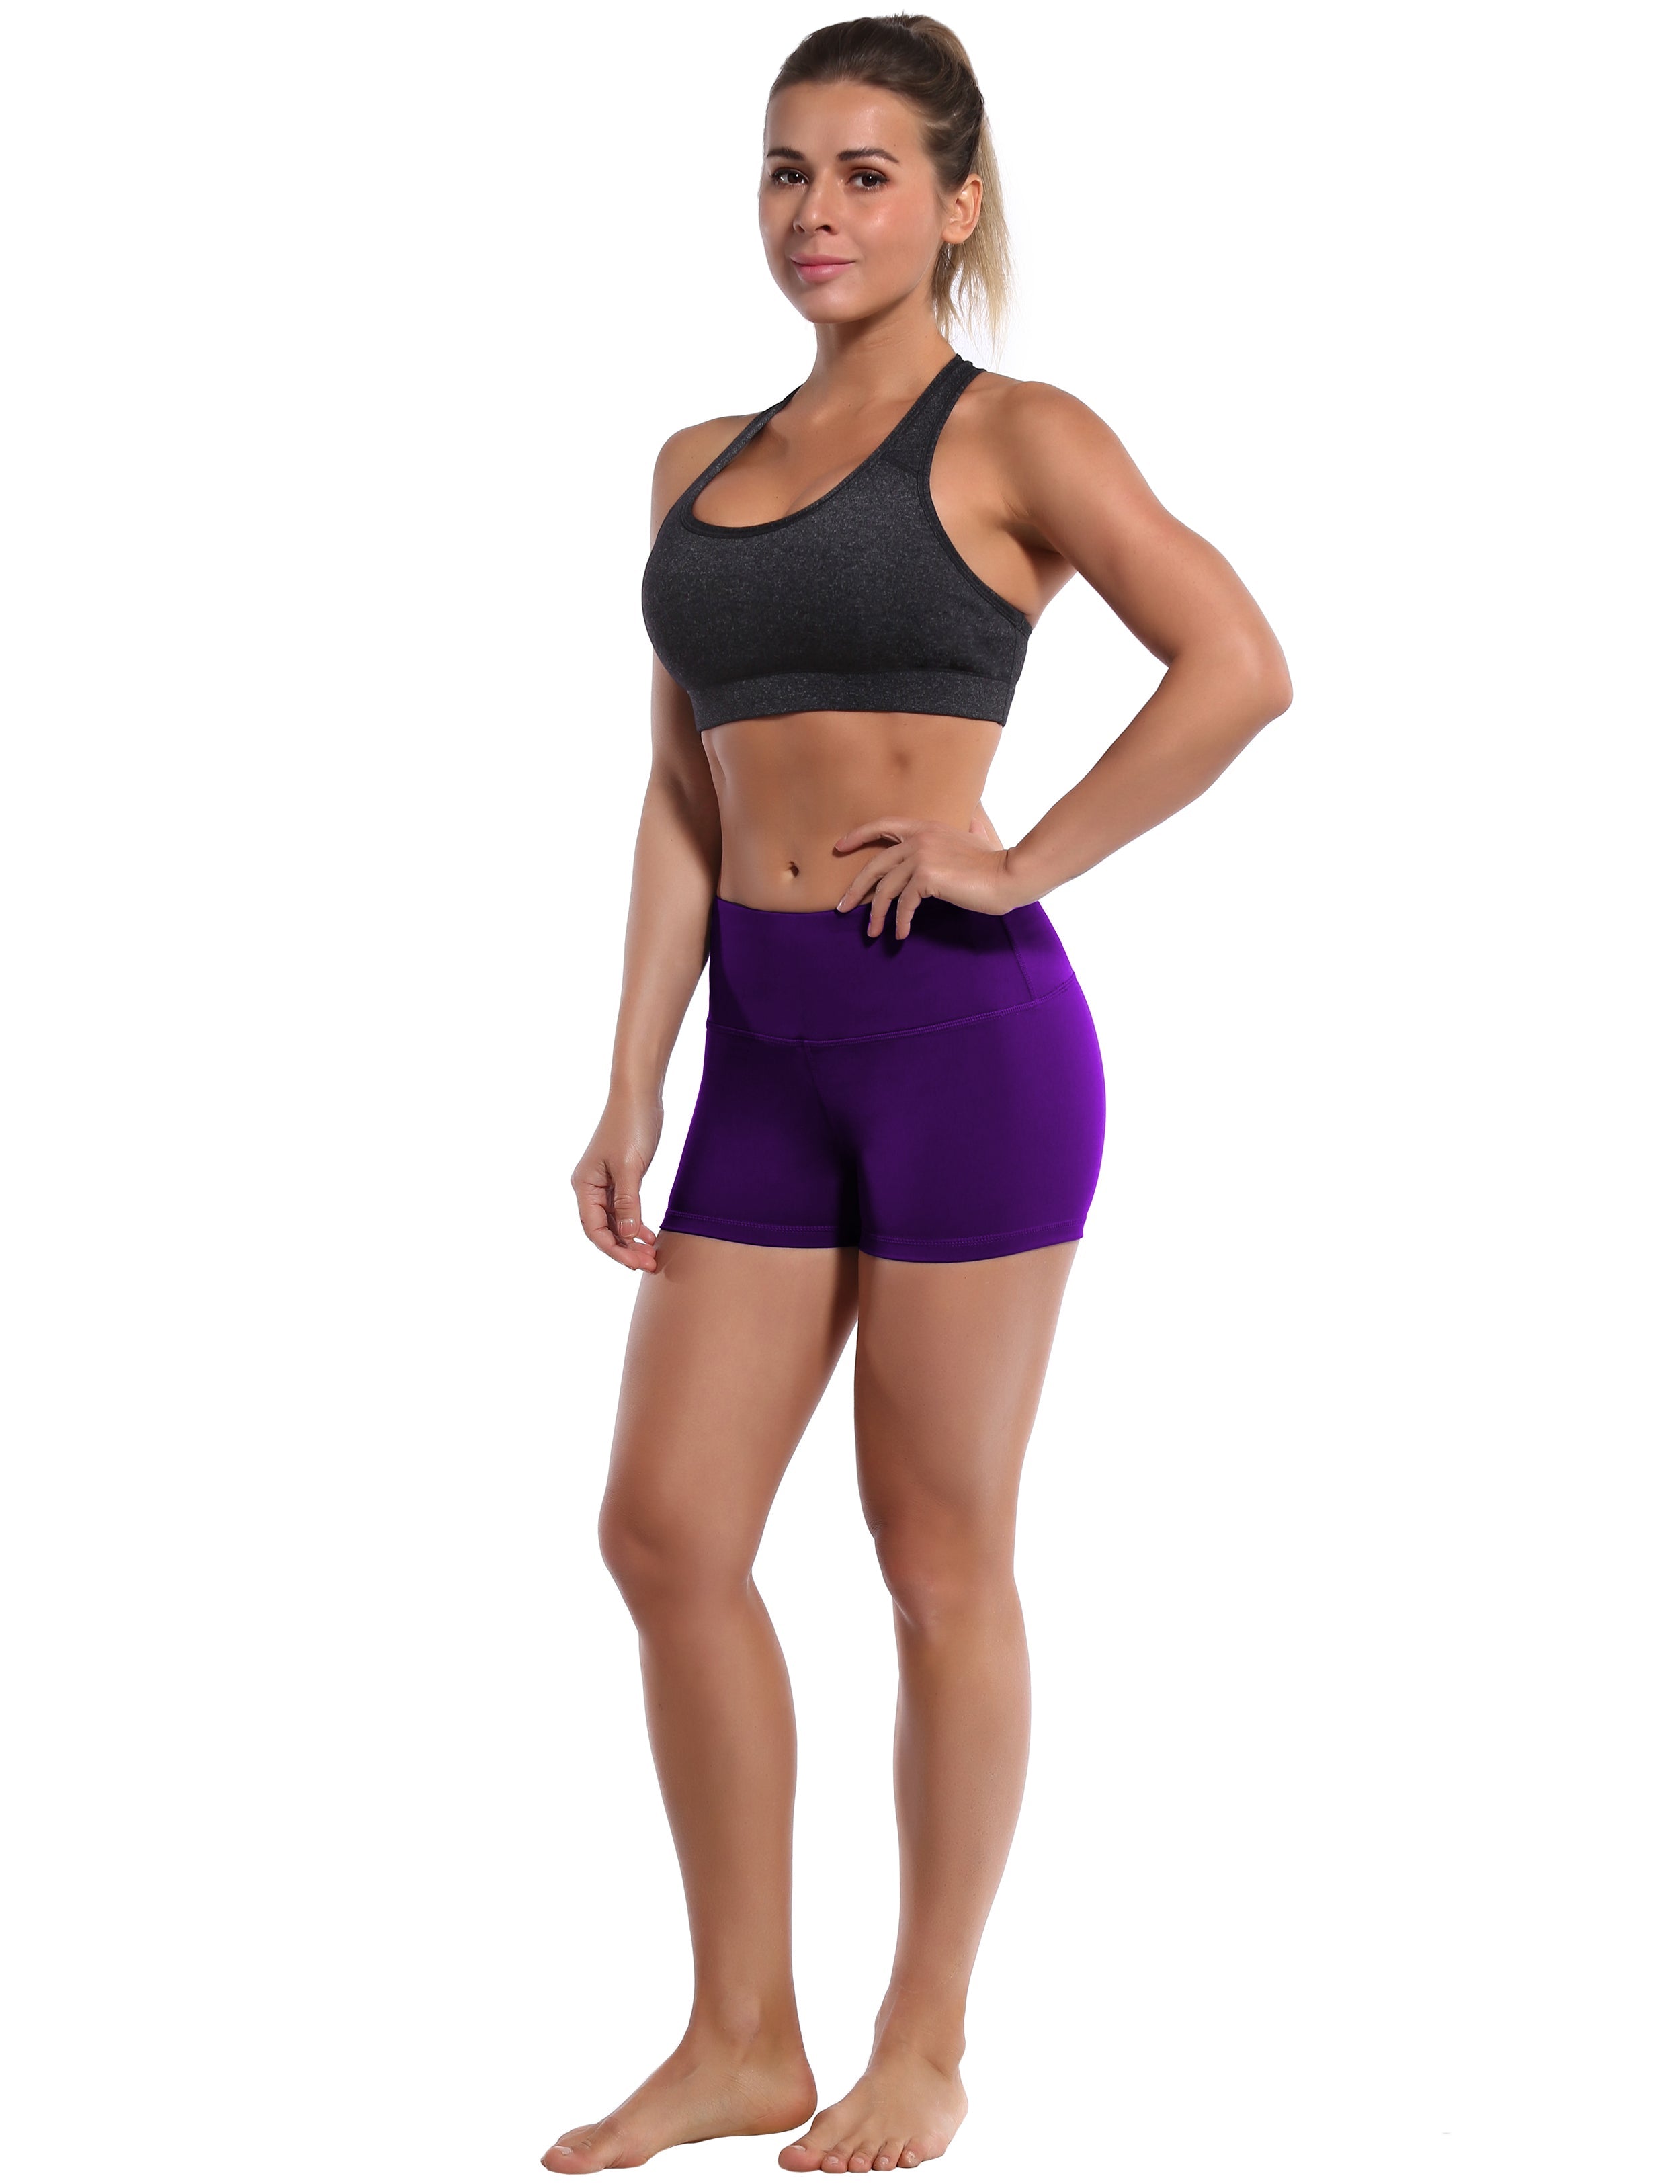 2.5" Jogging Shorts eggplantpurple Softest-ever fabric High elasticity High density 4-way stretch Fabric doesn't attract lint easily No see-through Moisture-wicking Machine wash 75% Nylon, 25% Spandex